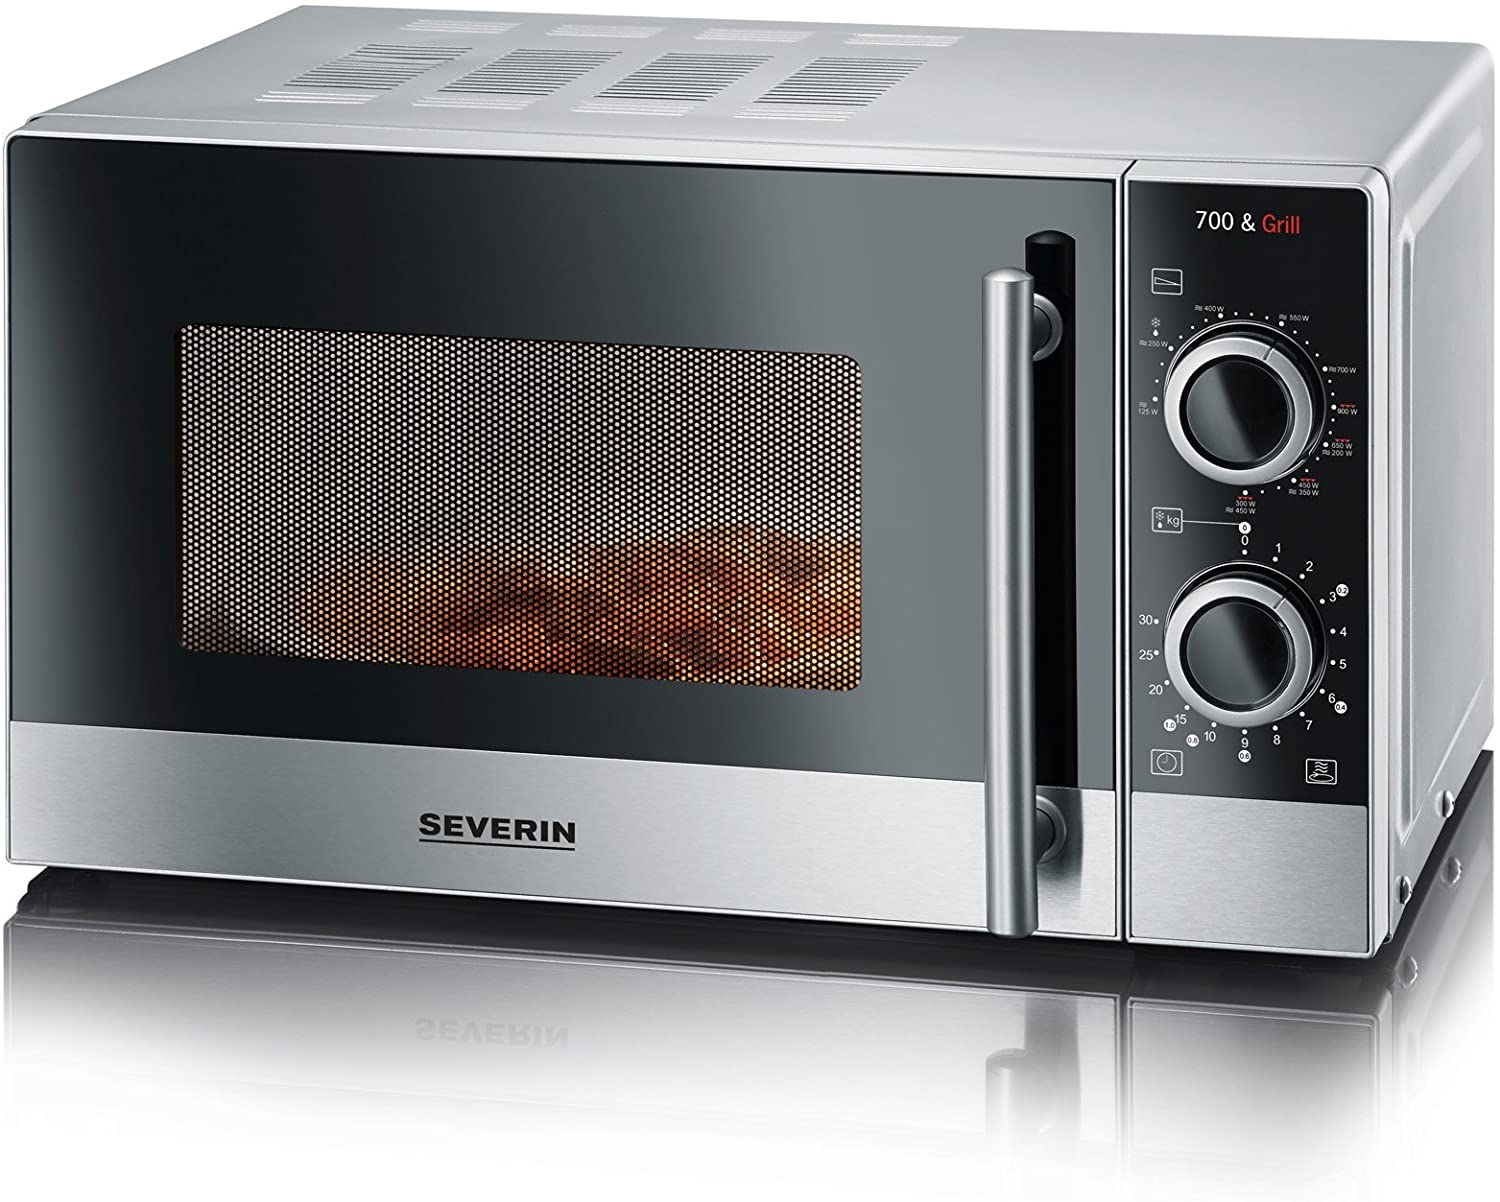 SEVERIN Microwave oven with grill function, approx. 20L: approx. 700 W, grill function approx. 900 W.